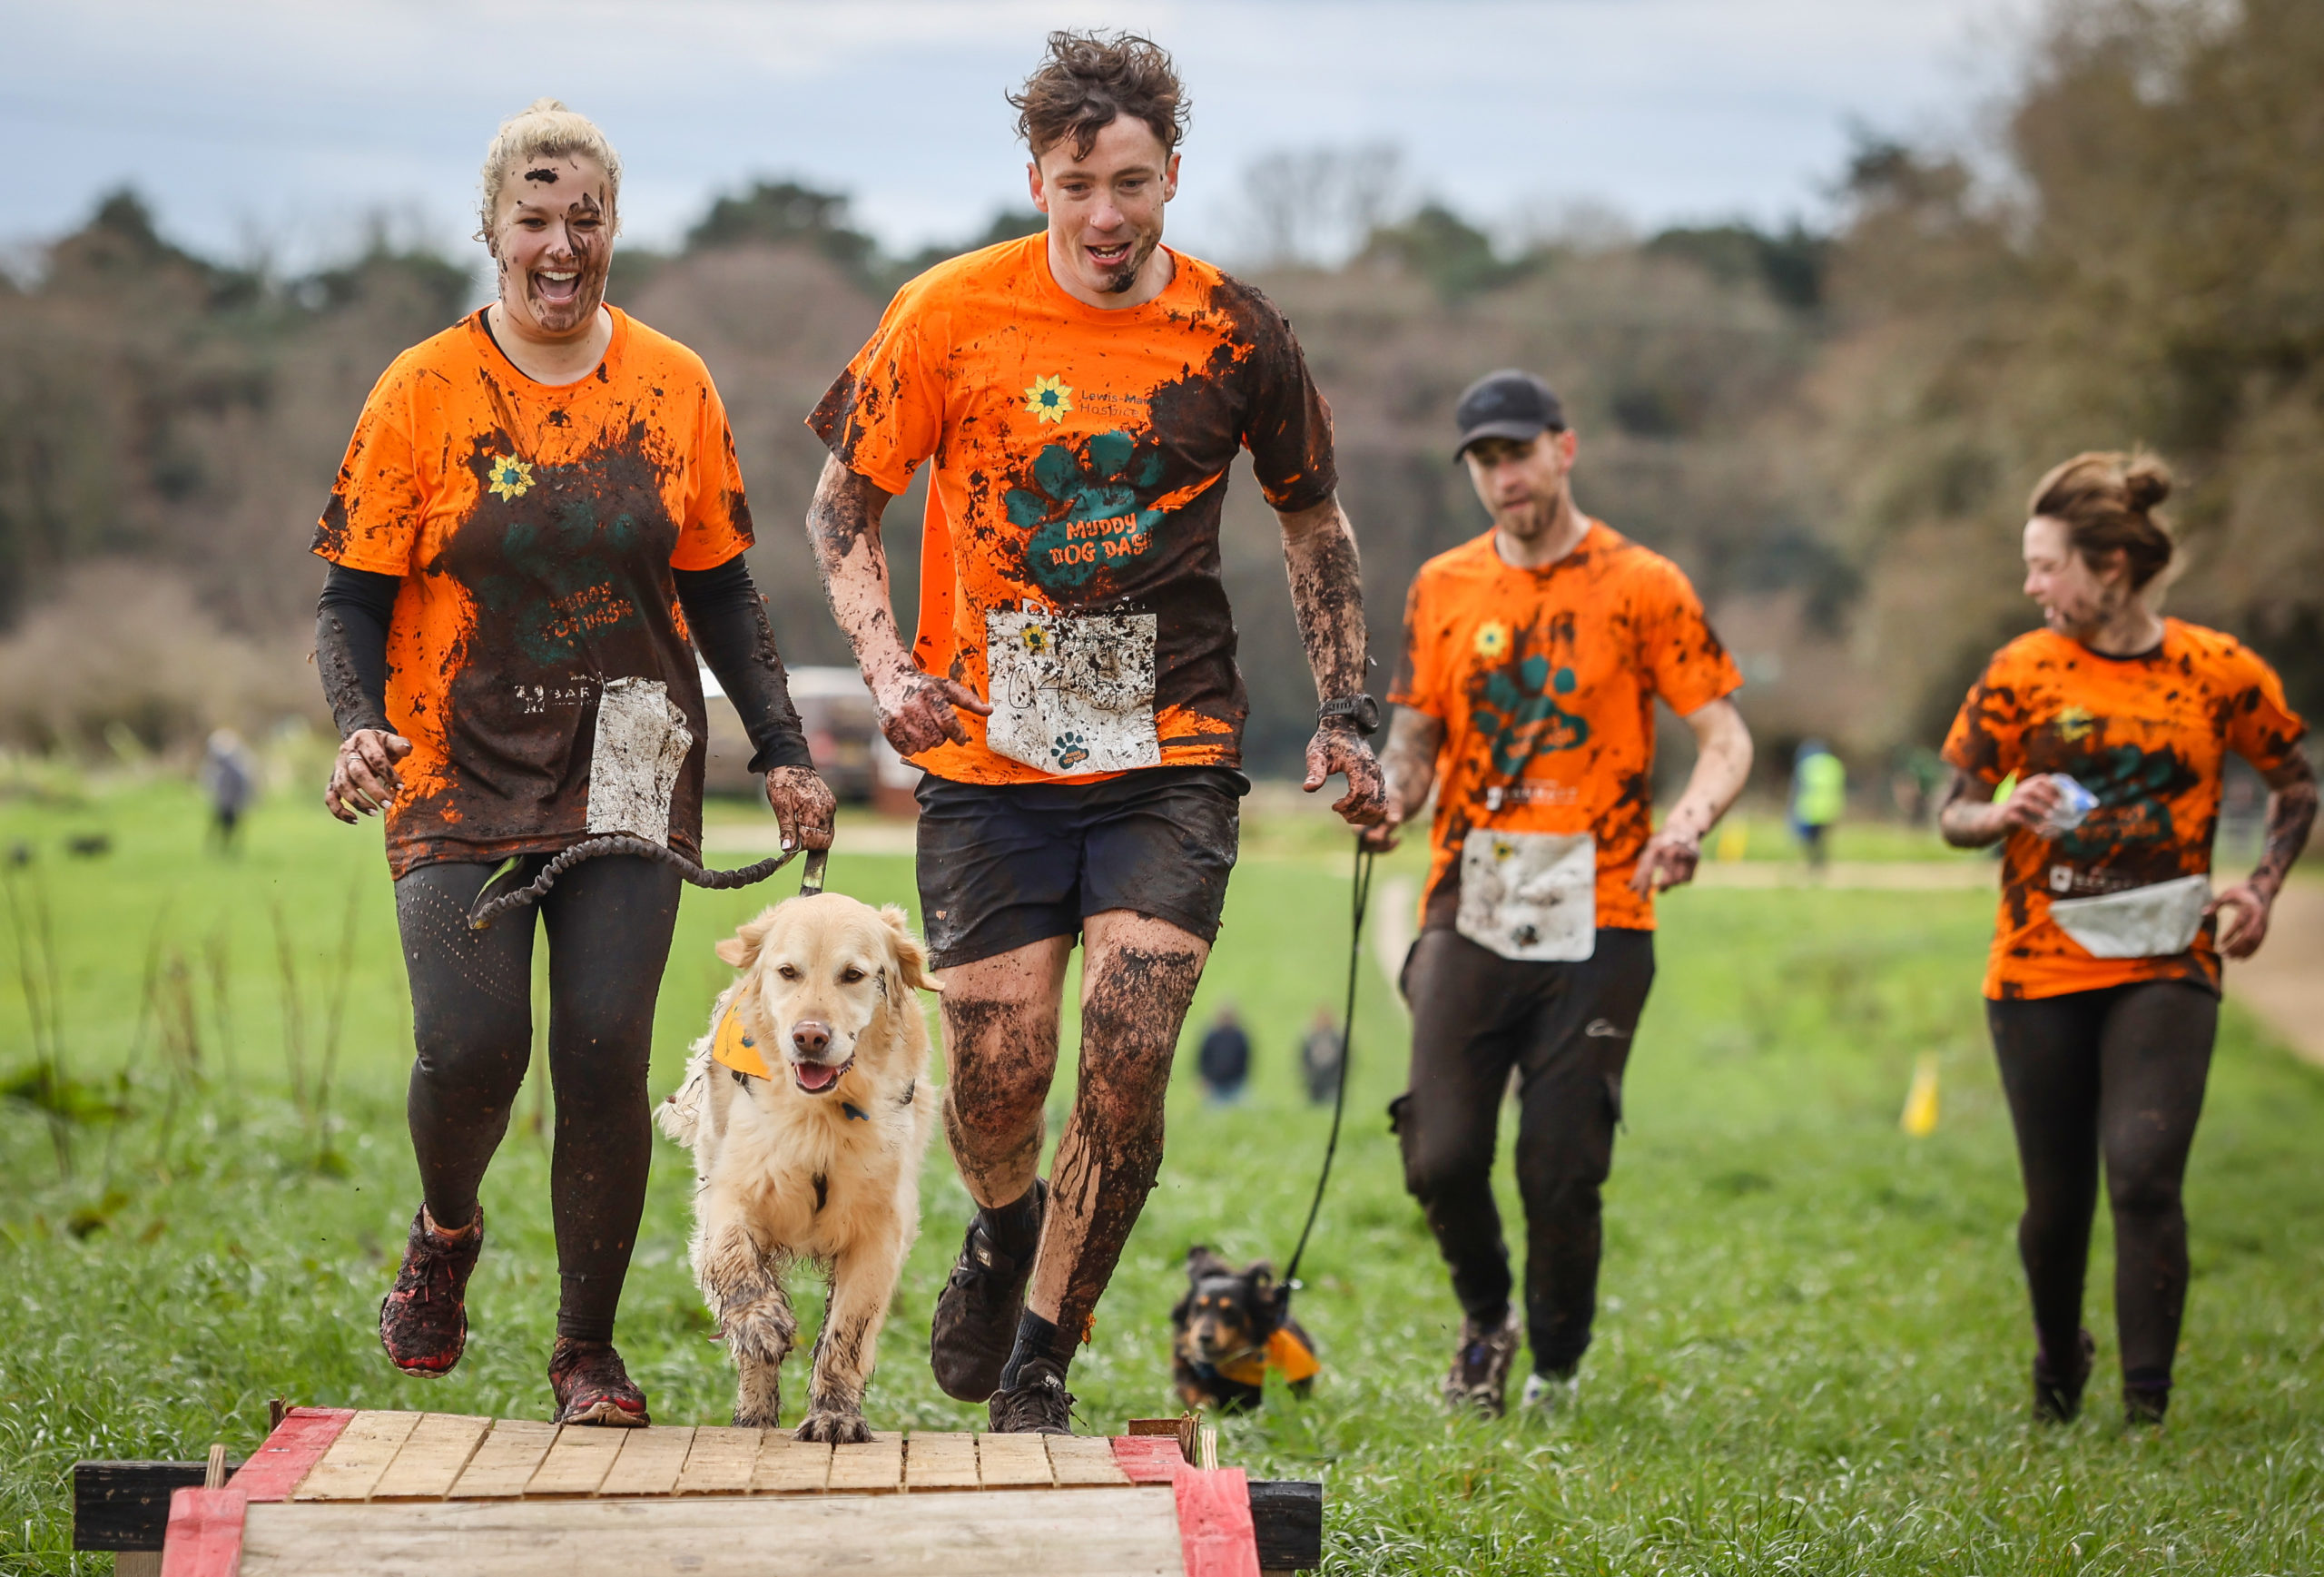 Dorset gets Muddy to raise vital funds for local charity hospice, Lewis-Manning Hospice Care